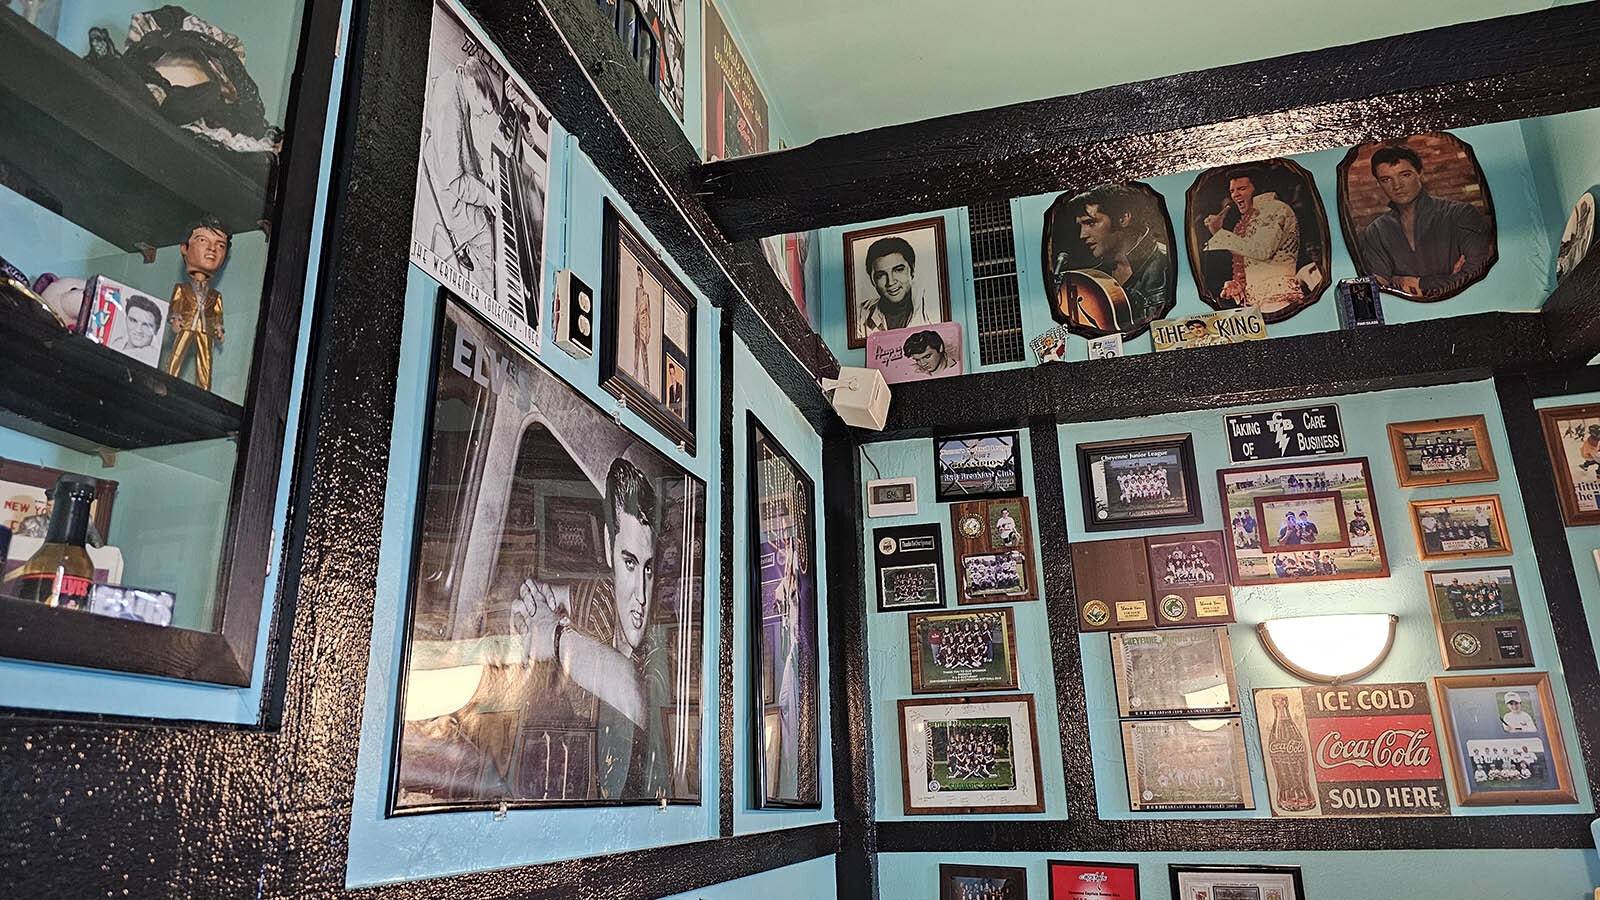 The walls are pure King kitsch with hundreds of photos, plaques and other Elvis memorabilia.